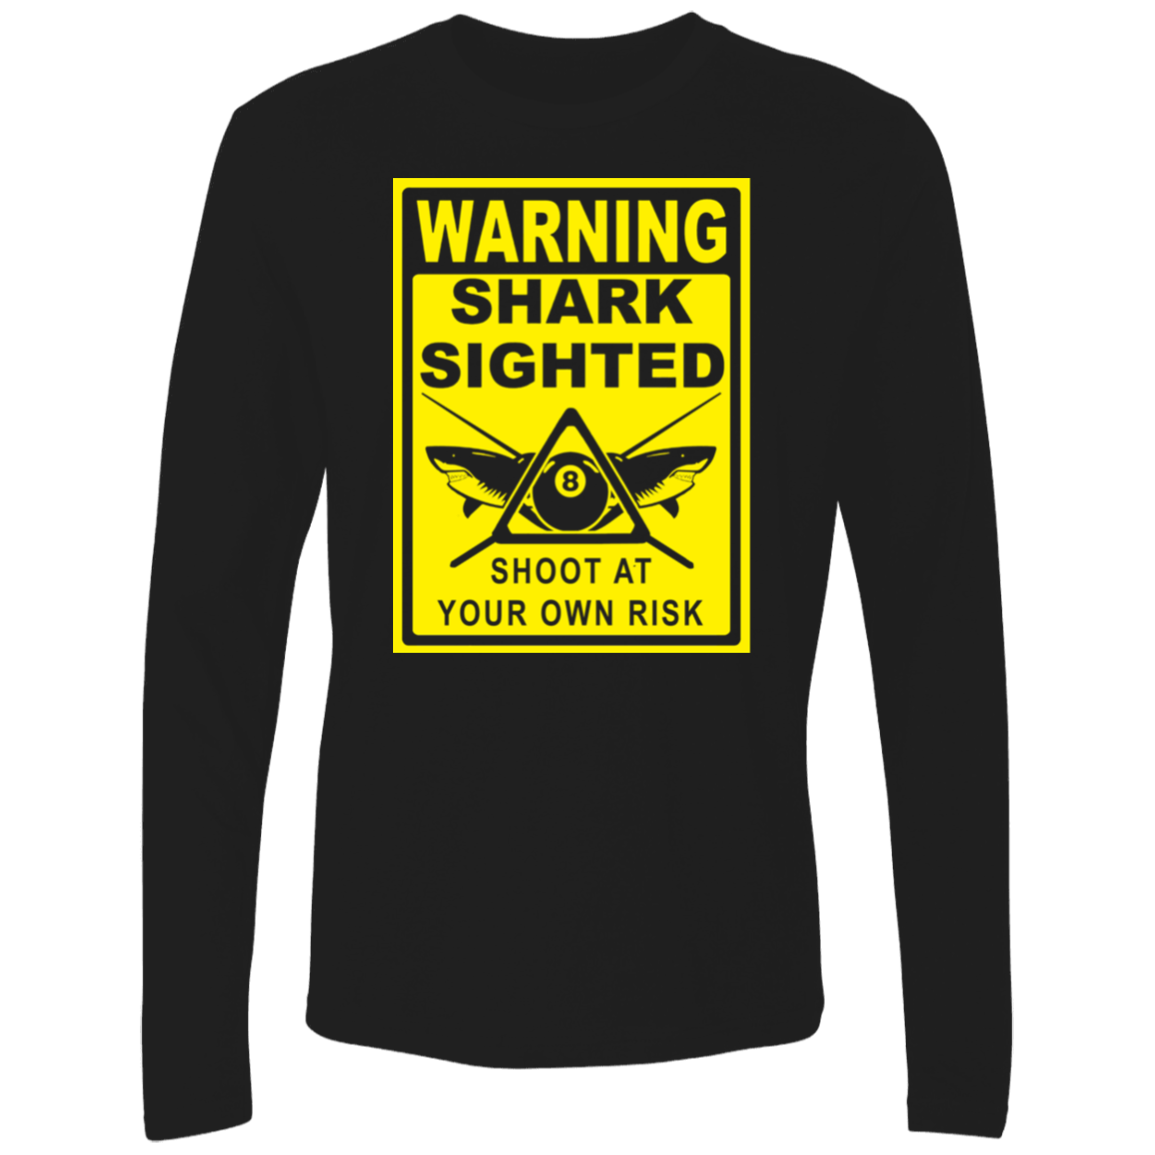 The GHOATS Custom Design #35. Beware of Sharks. Shoot at Your Own Risk. Ultra Soft Fitted Men's Long Sleeve